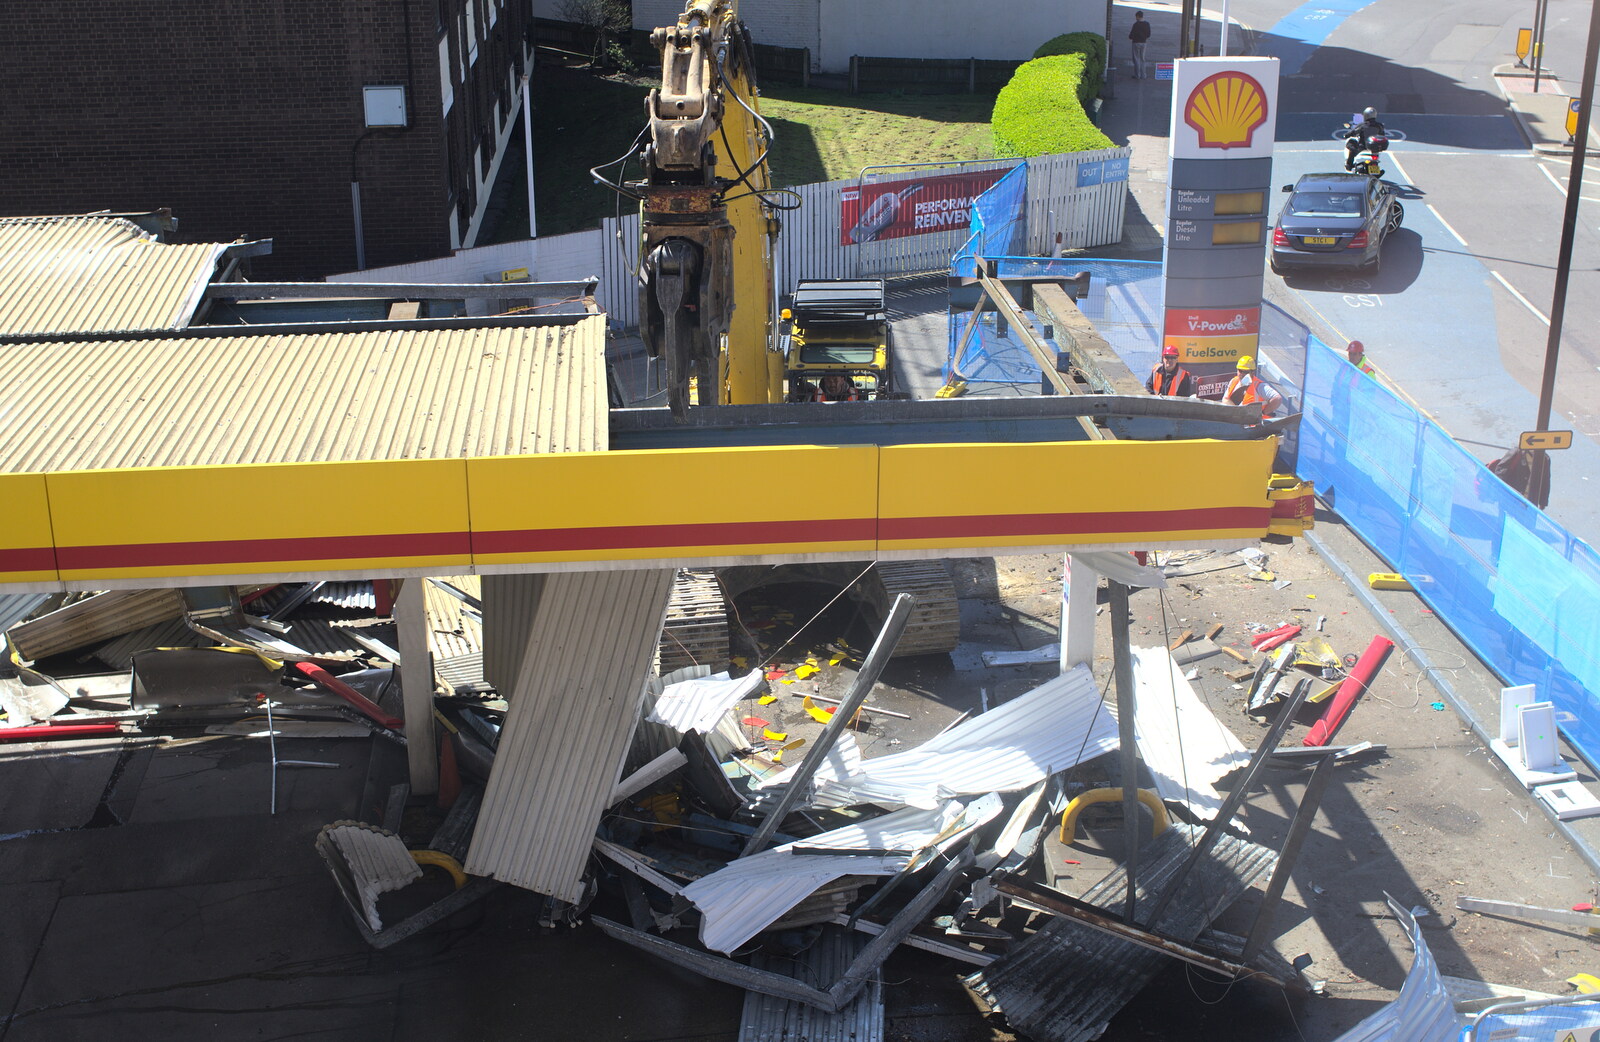 A pile of metal builds up below from The Garage-Eating Monster of Southwark, London - 1st May 2013